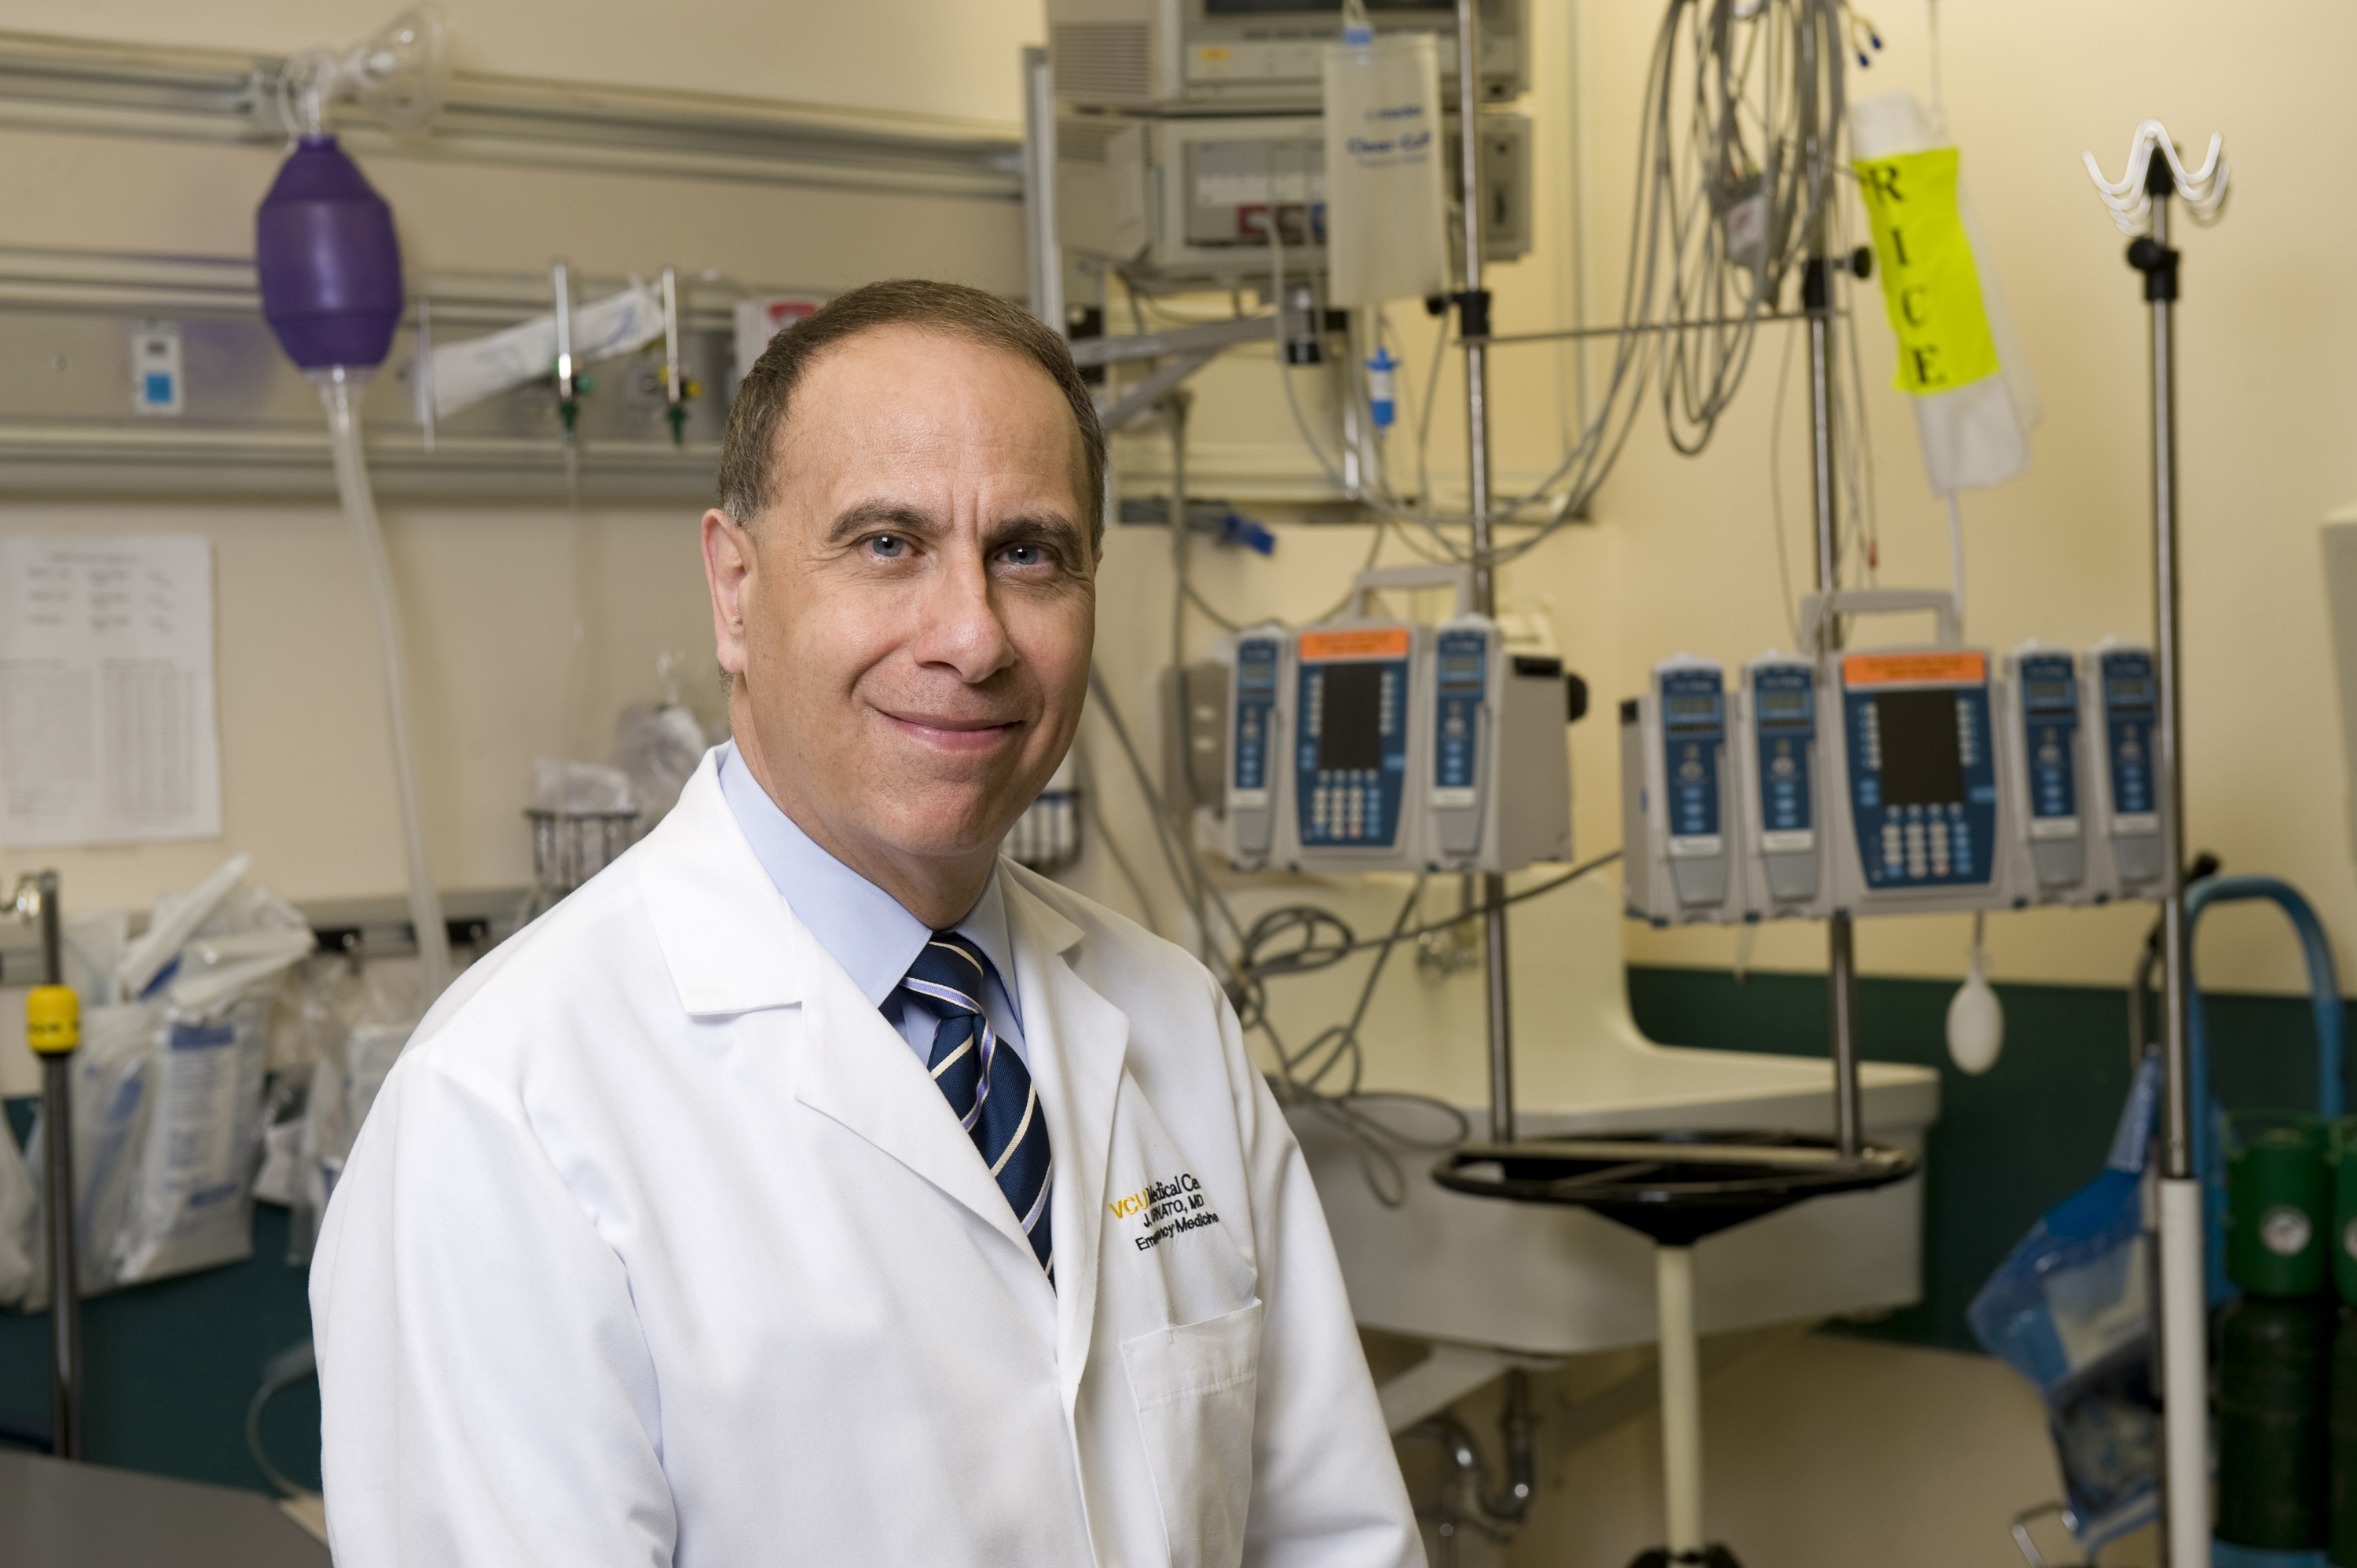 Dr. Joseph Ornato to Transition Away from Role as Emergency Medicine Chair